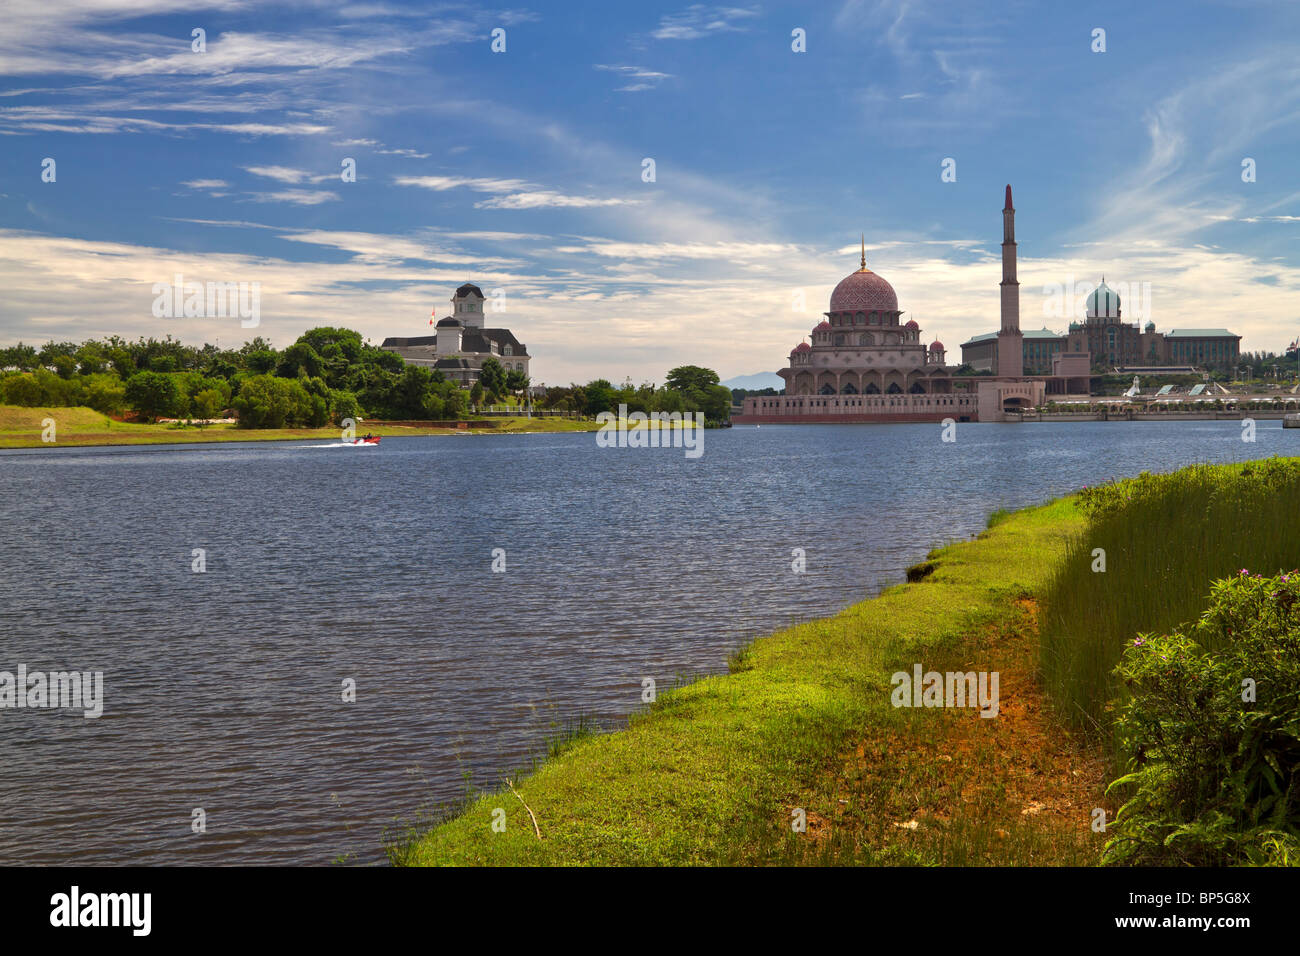 Putrajaya with Putra Mosque, the Prime Minister's Office and Darul Ehsan Palace. Stock Photo